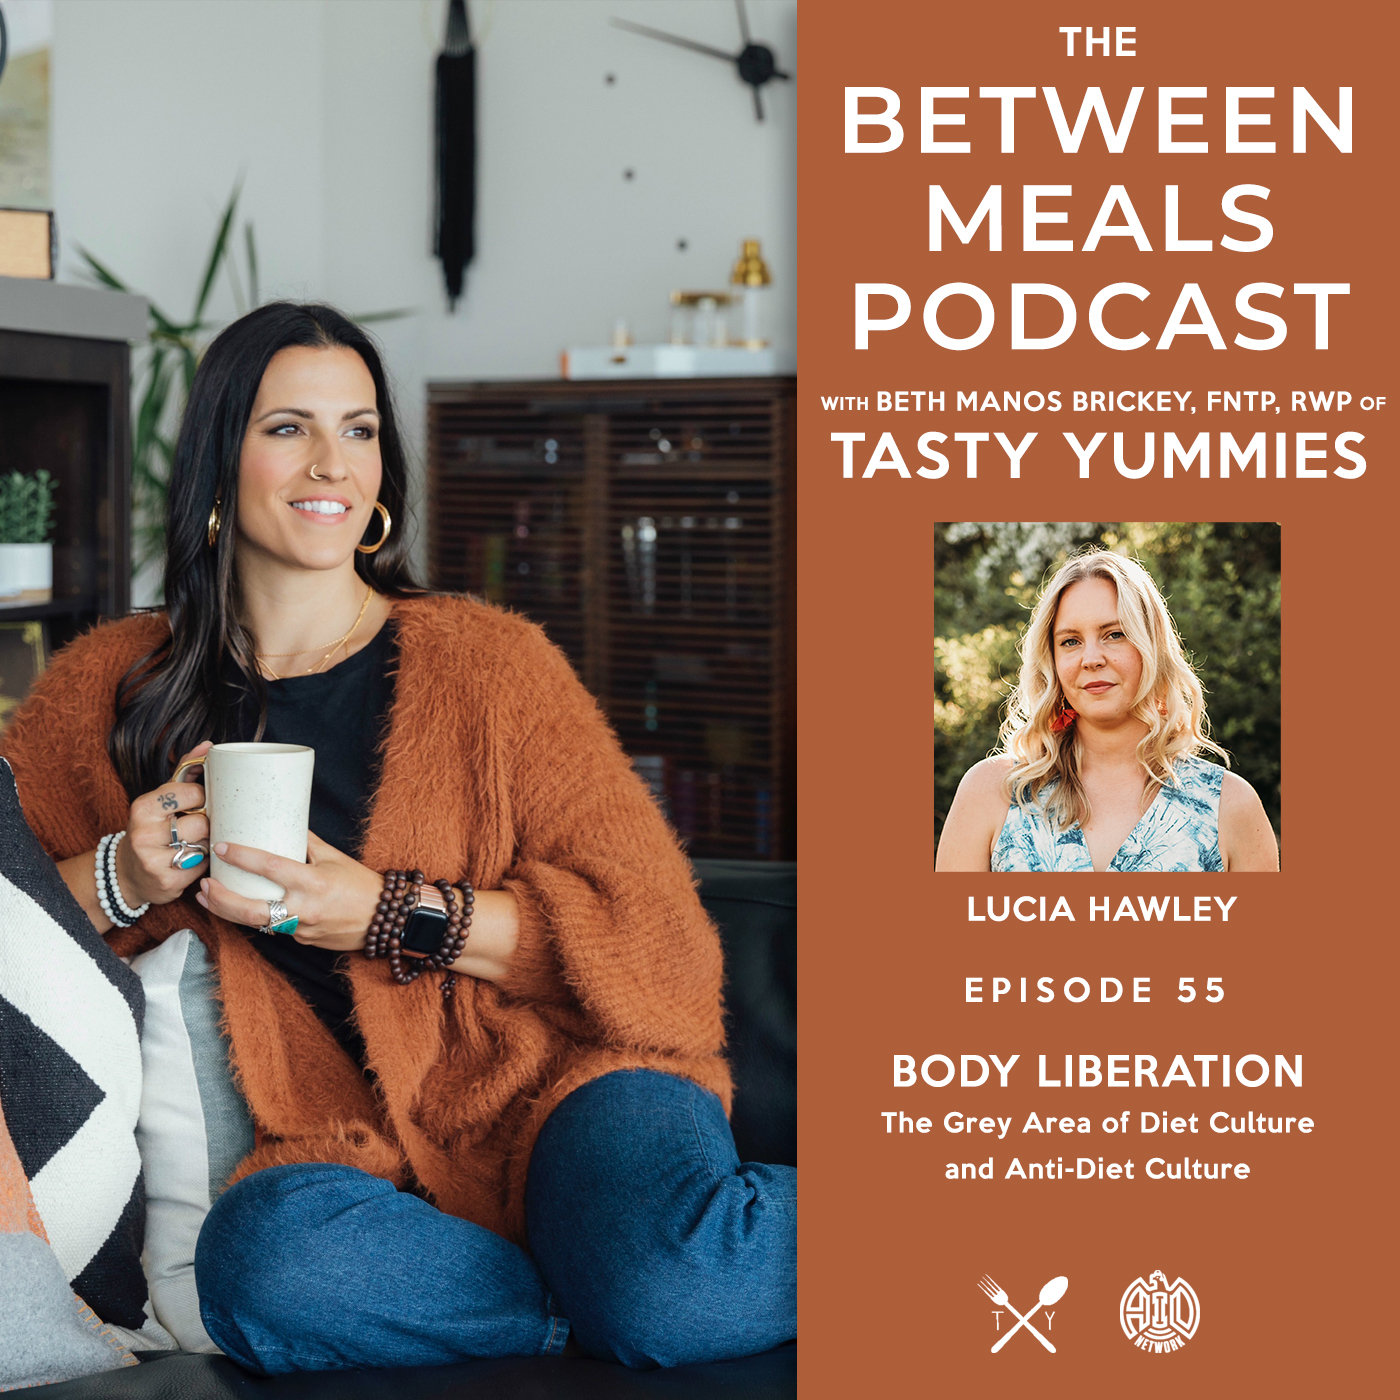 Between Meals Podcast. Episode 55: Body Liberation: The Grey Area of Diet Culture and Anti-Diet Culture